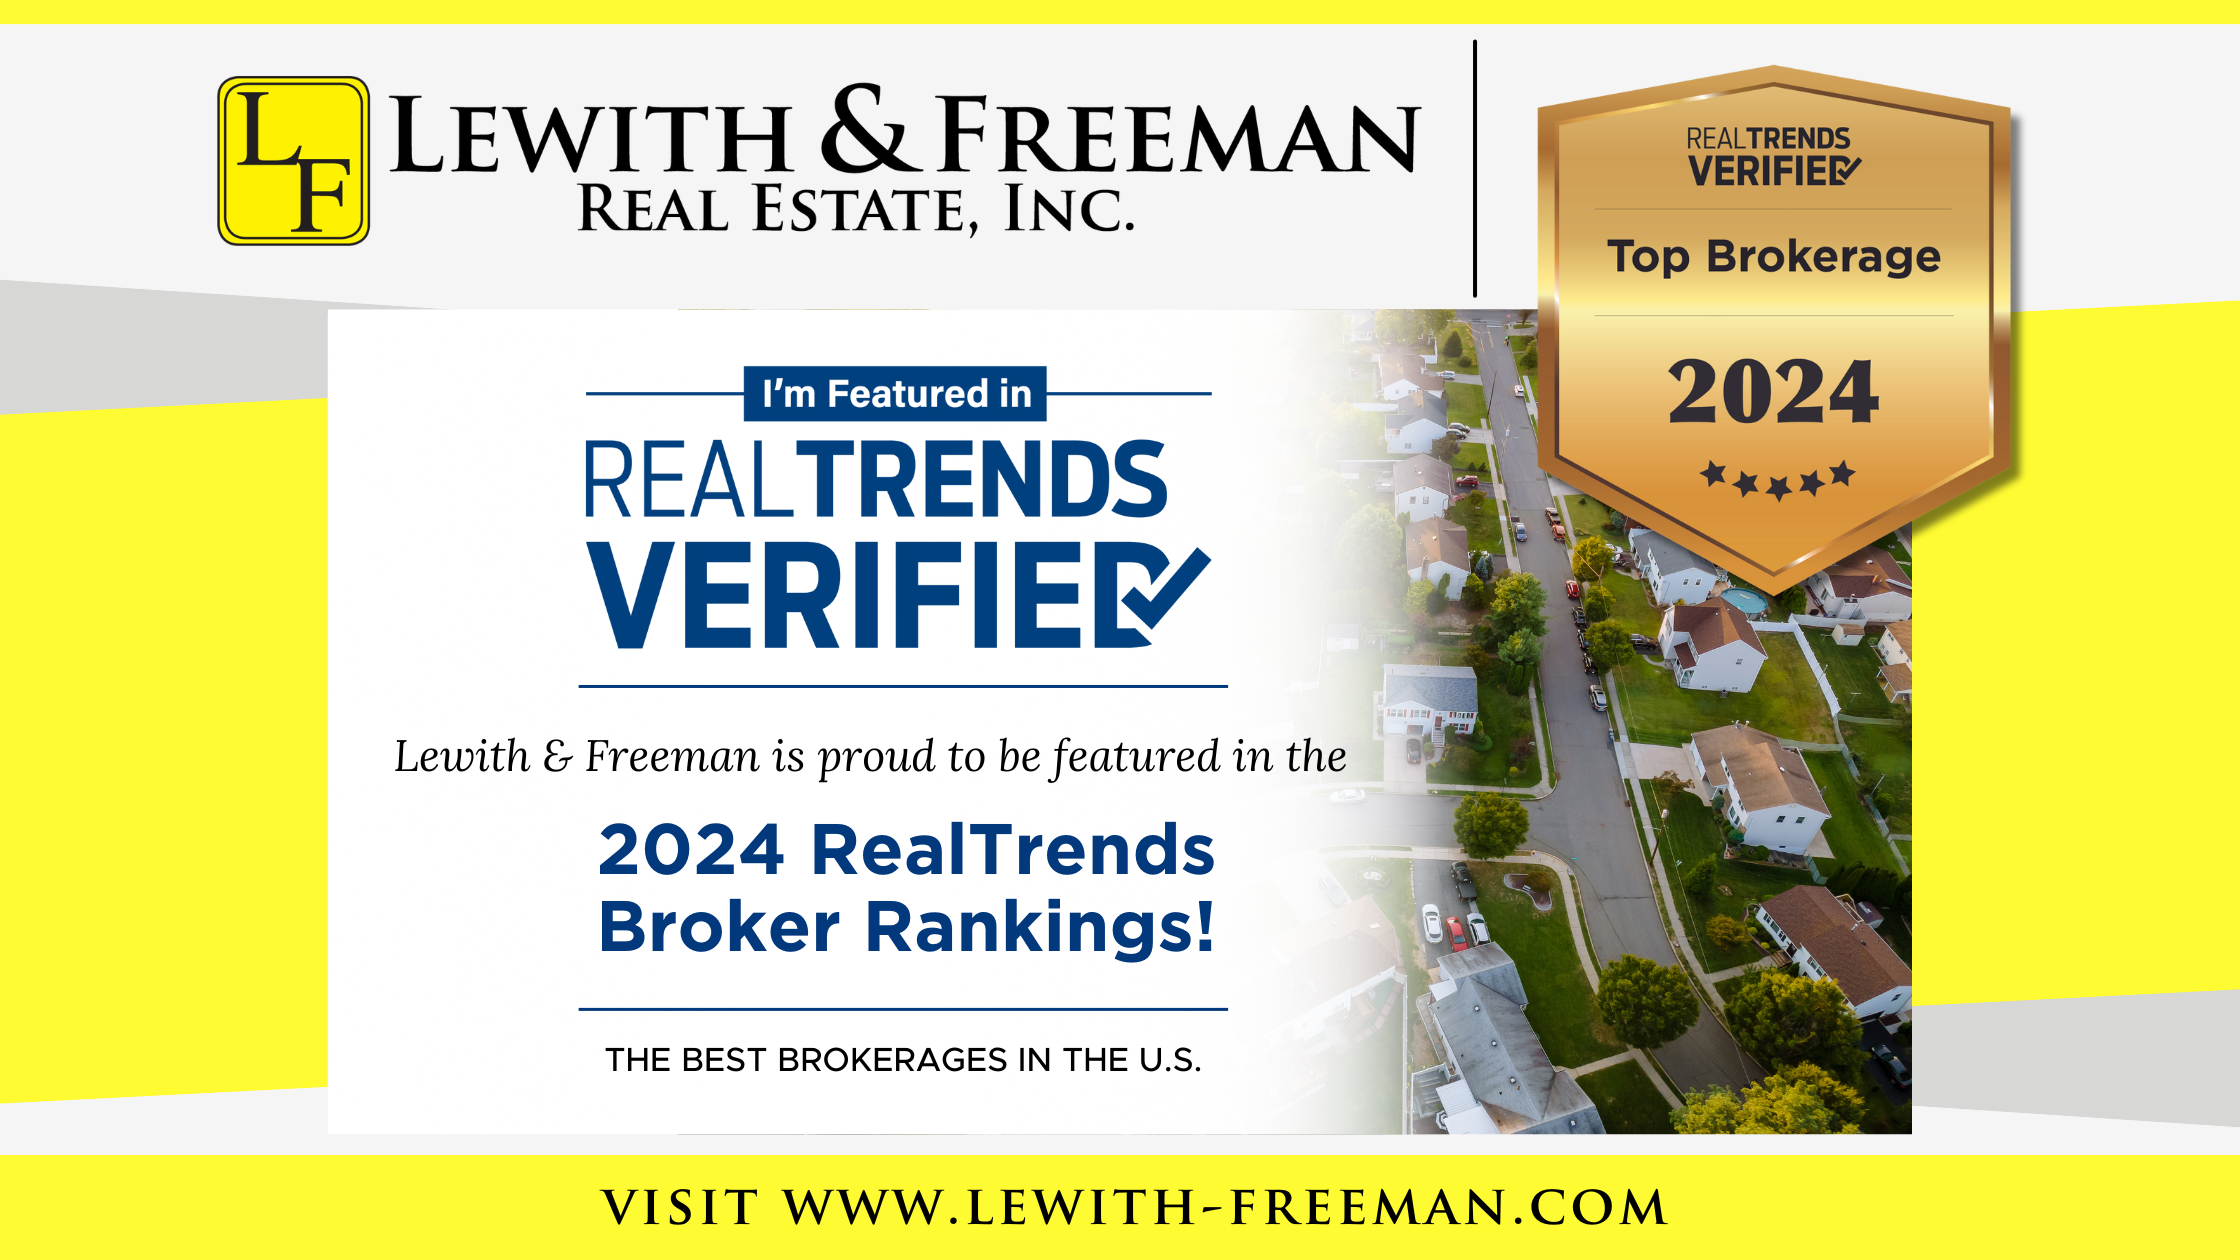 Lewith & Freeman Real Estate Is Recognized in the RealTrends 2024 Broker Rankings